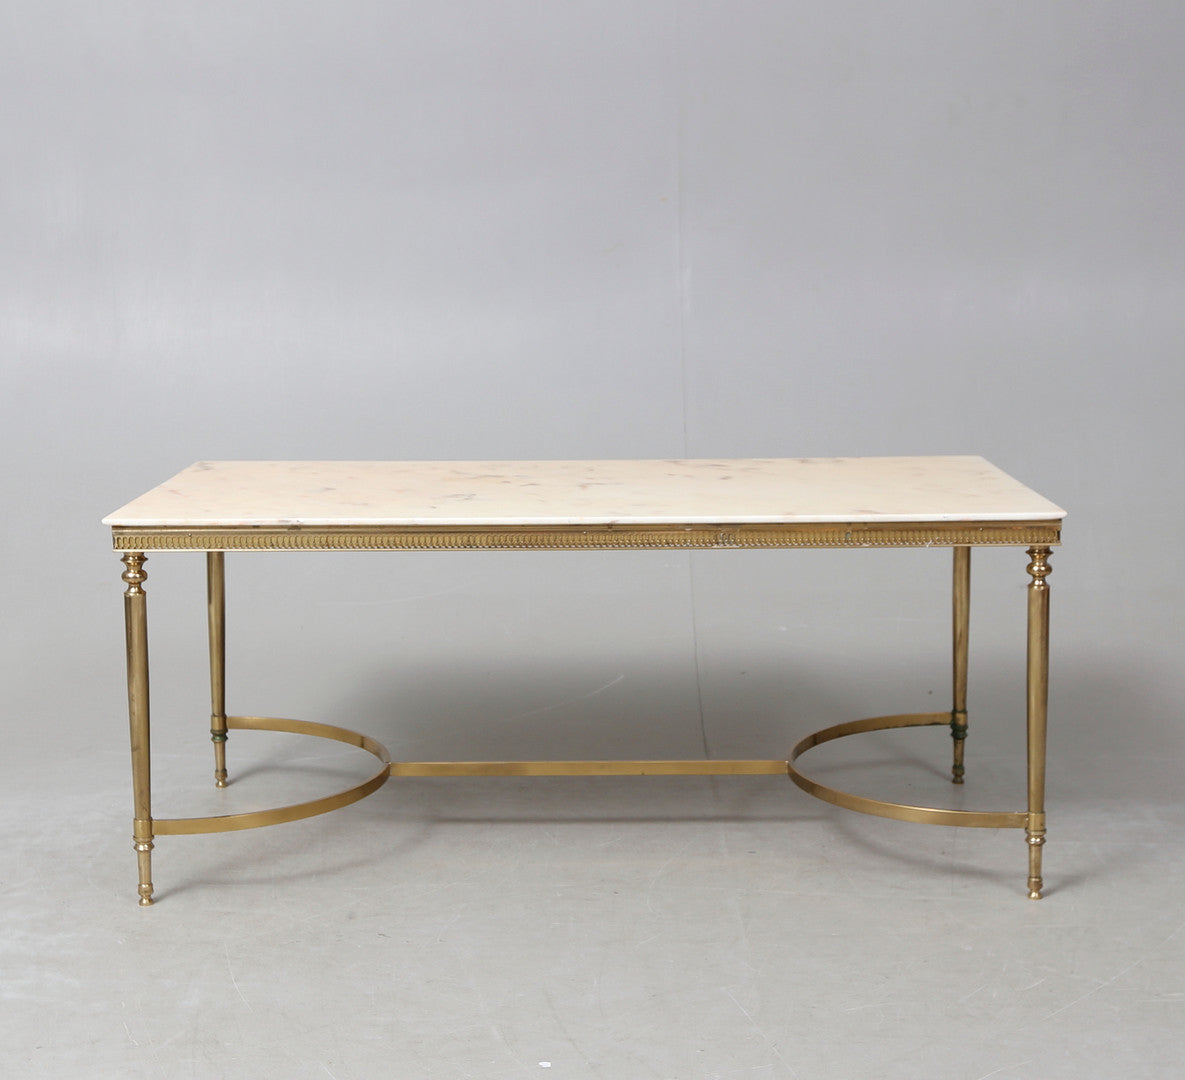 Brass & Marble Coffee Table